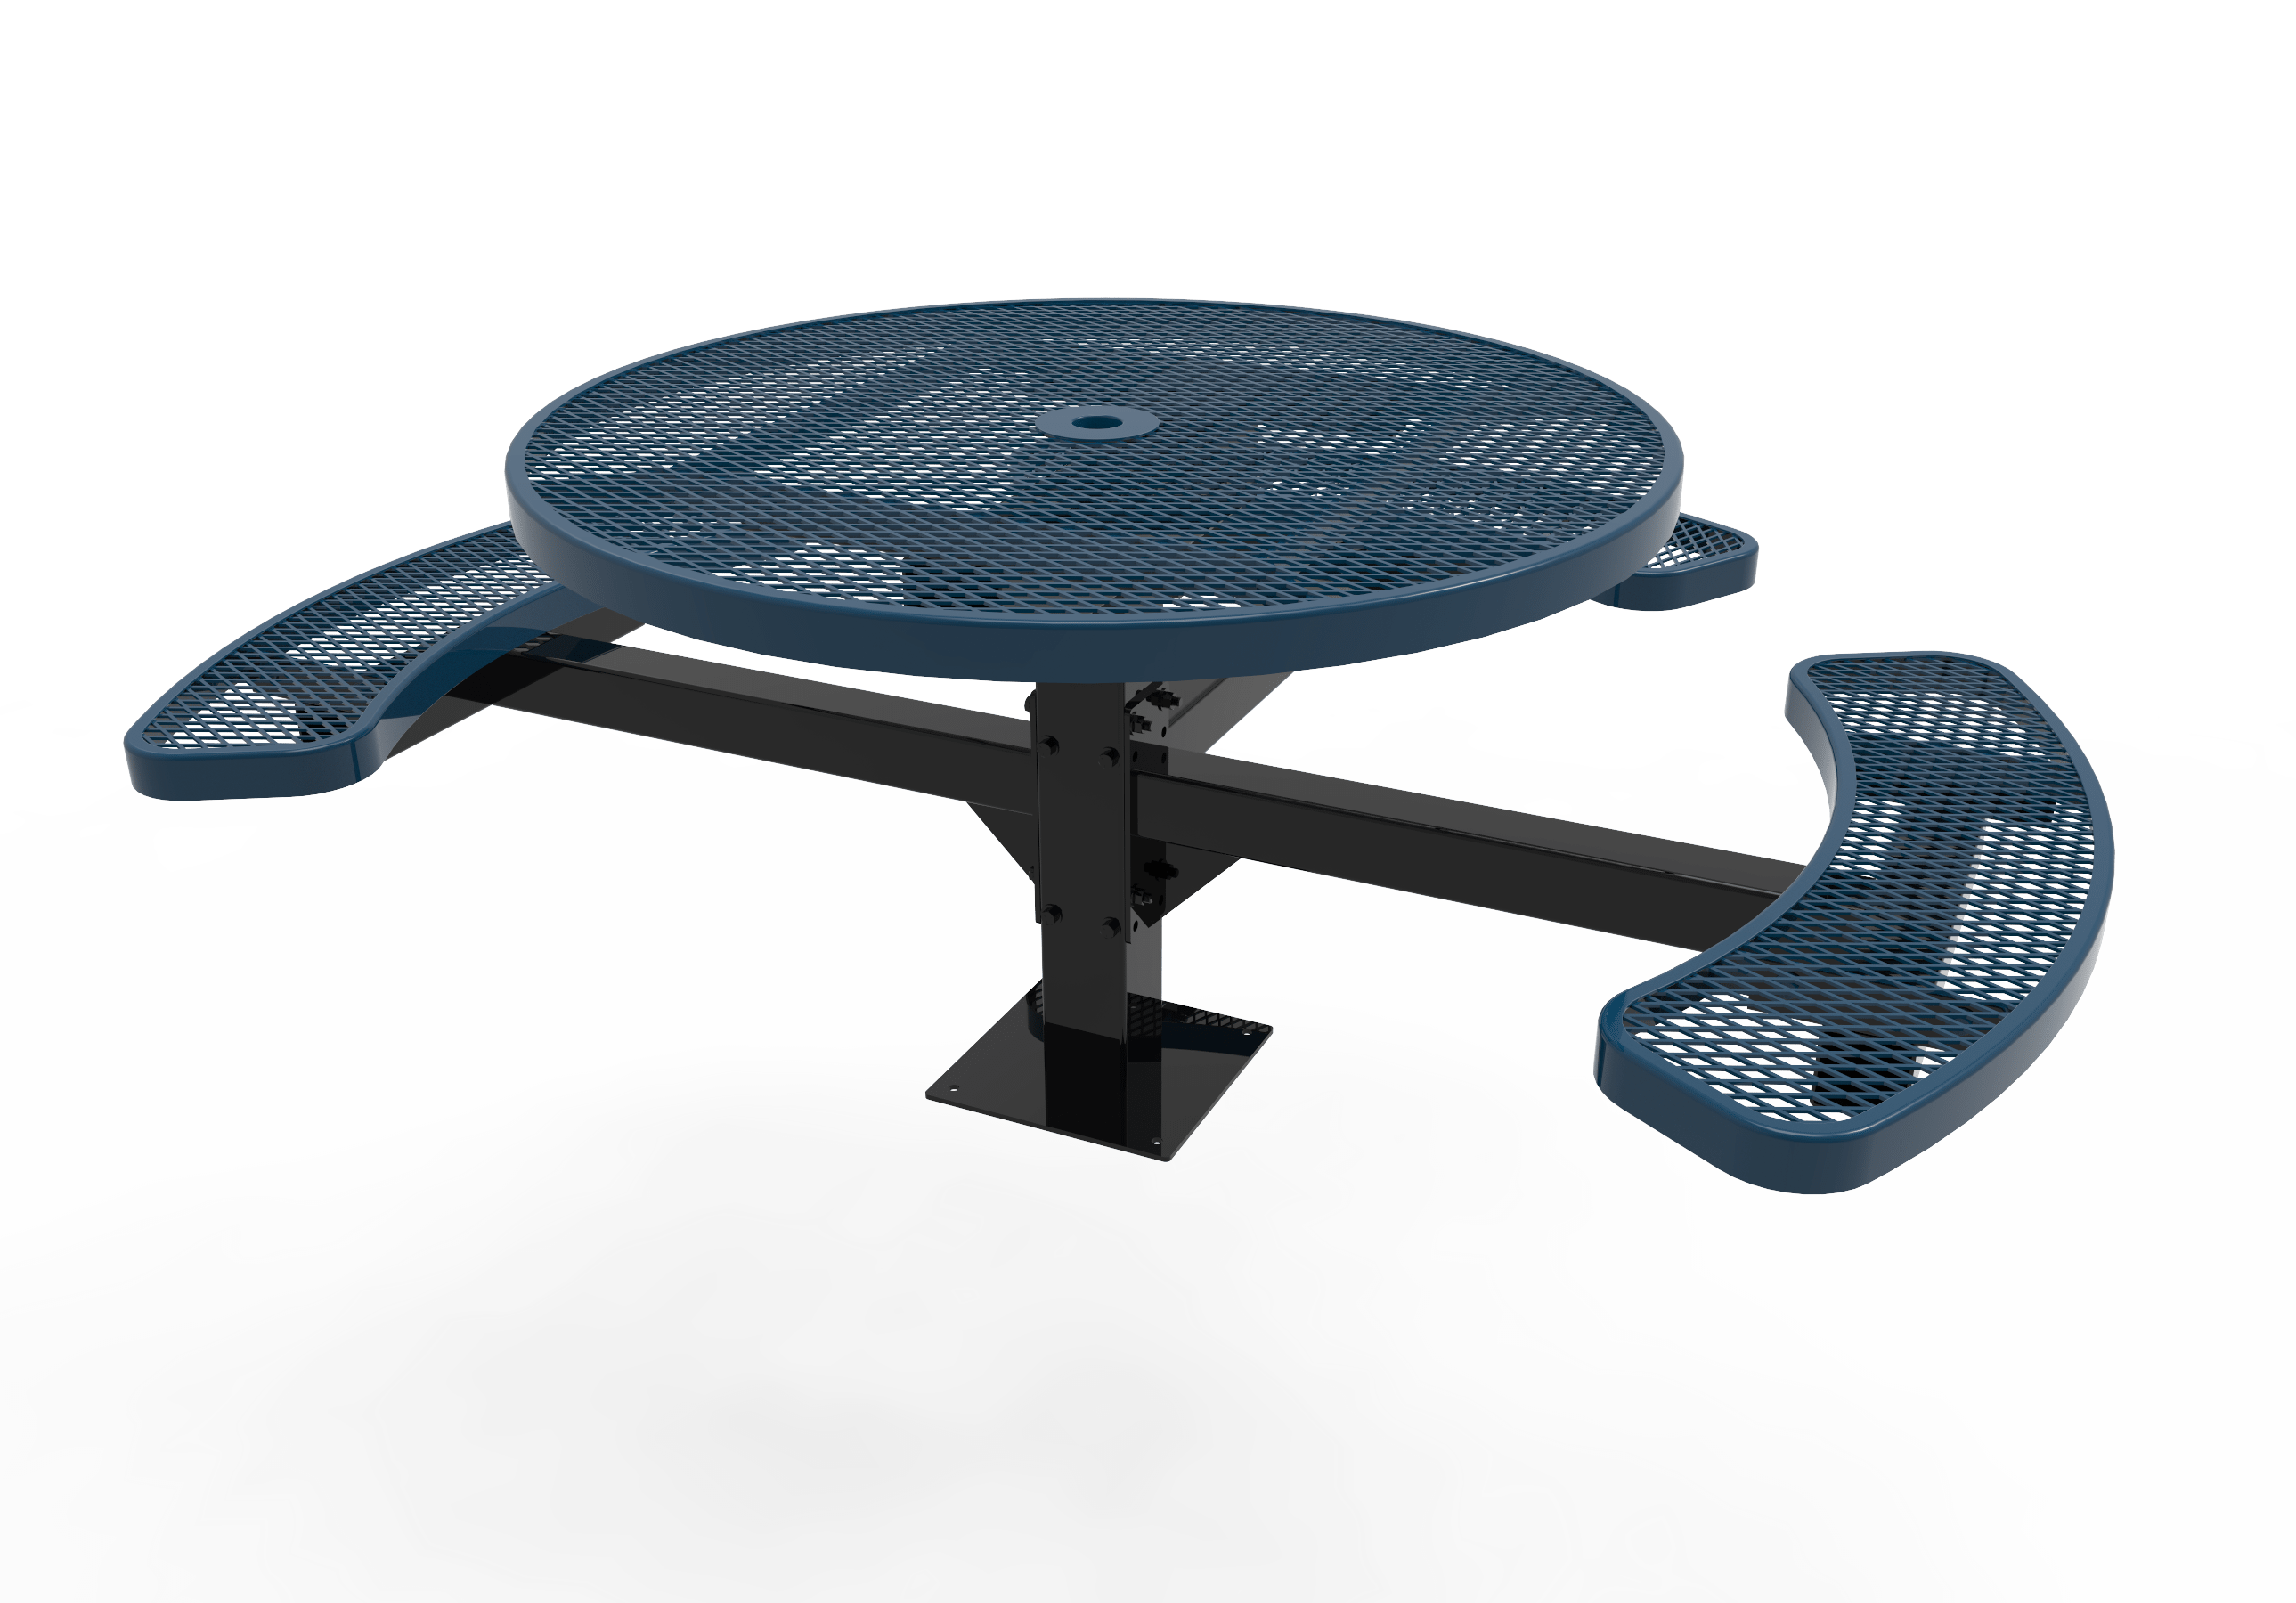 46″ Round Pedestal Surface Table 3 Seat-Mesh
TRD46-C-15-003
Industry Standard Finish
$1299.00
TRD46-A-15-003
Advantage Premium Finish
$1729.00
